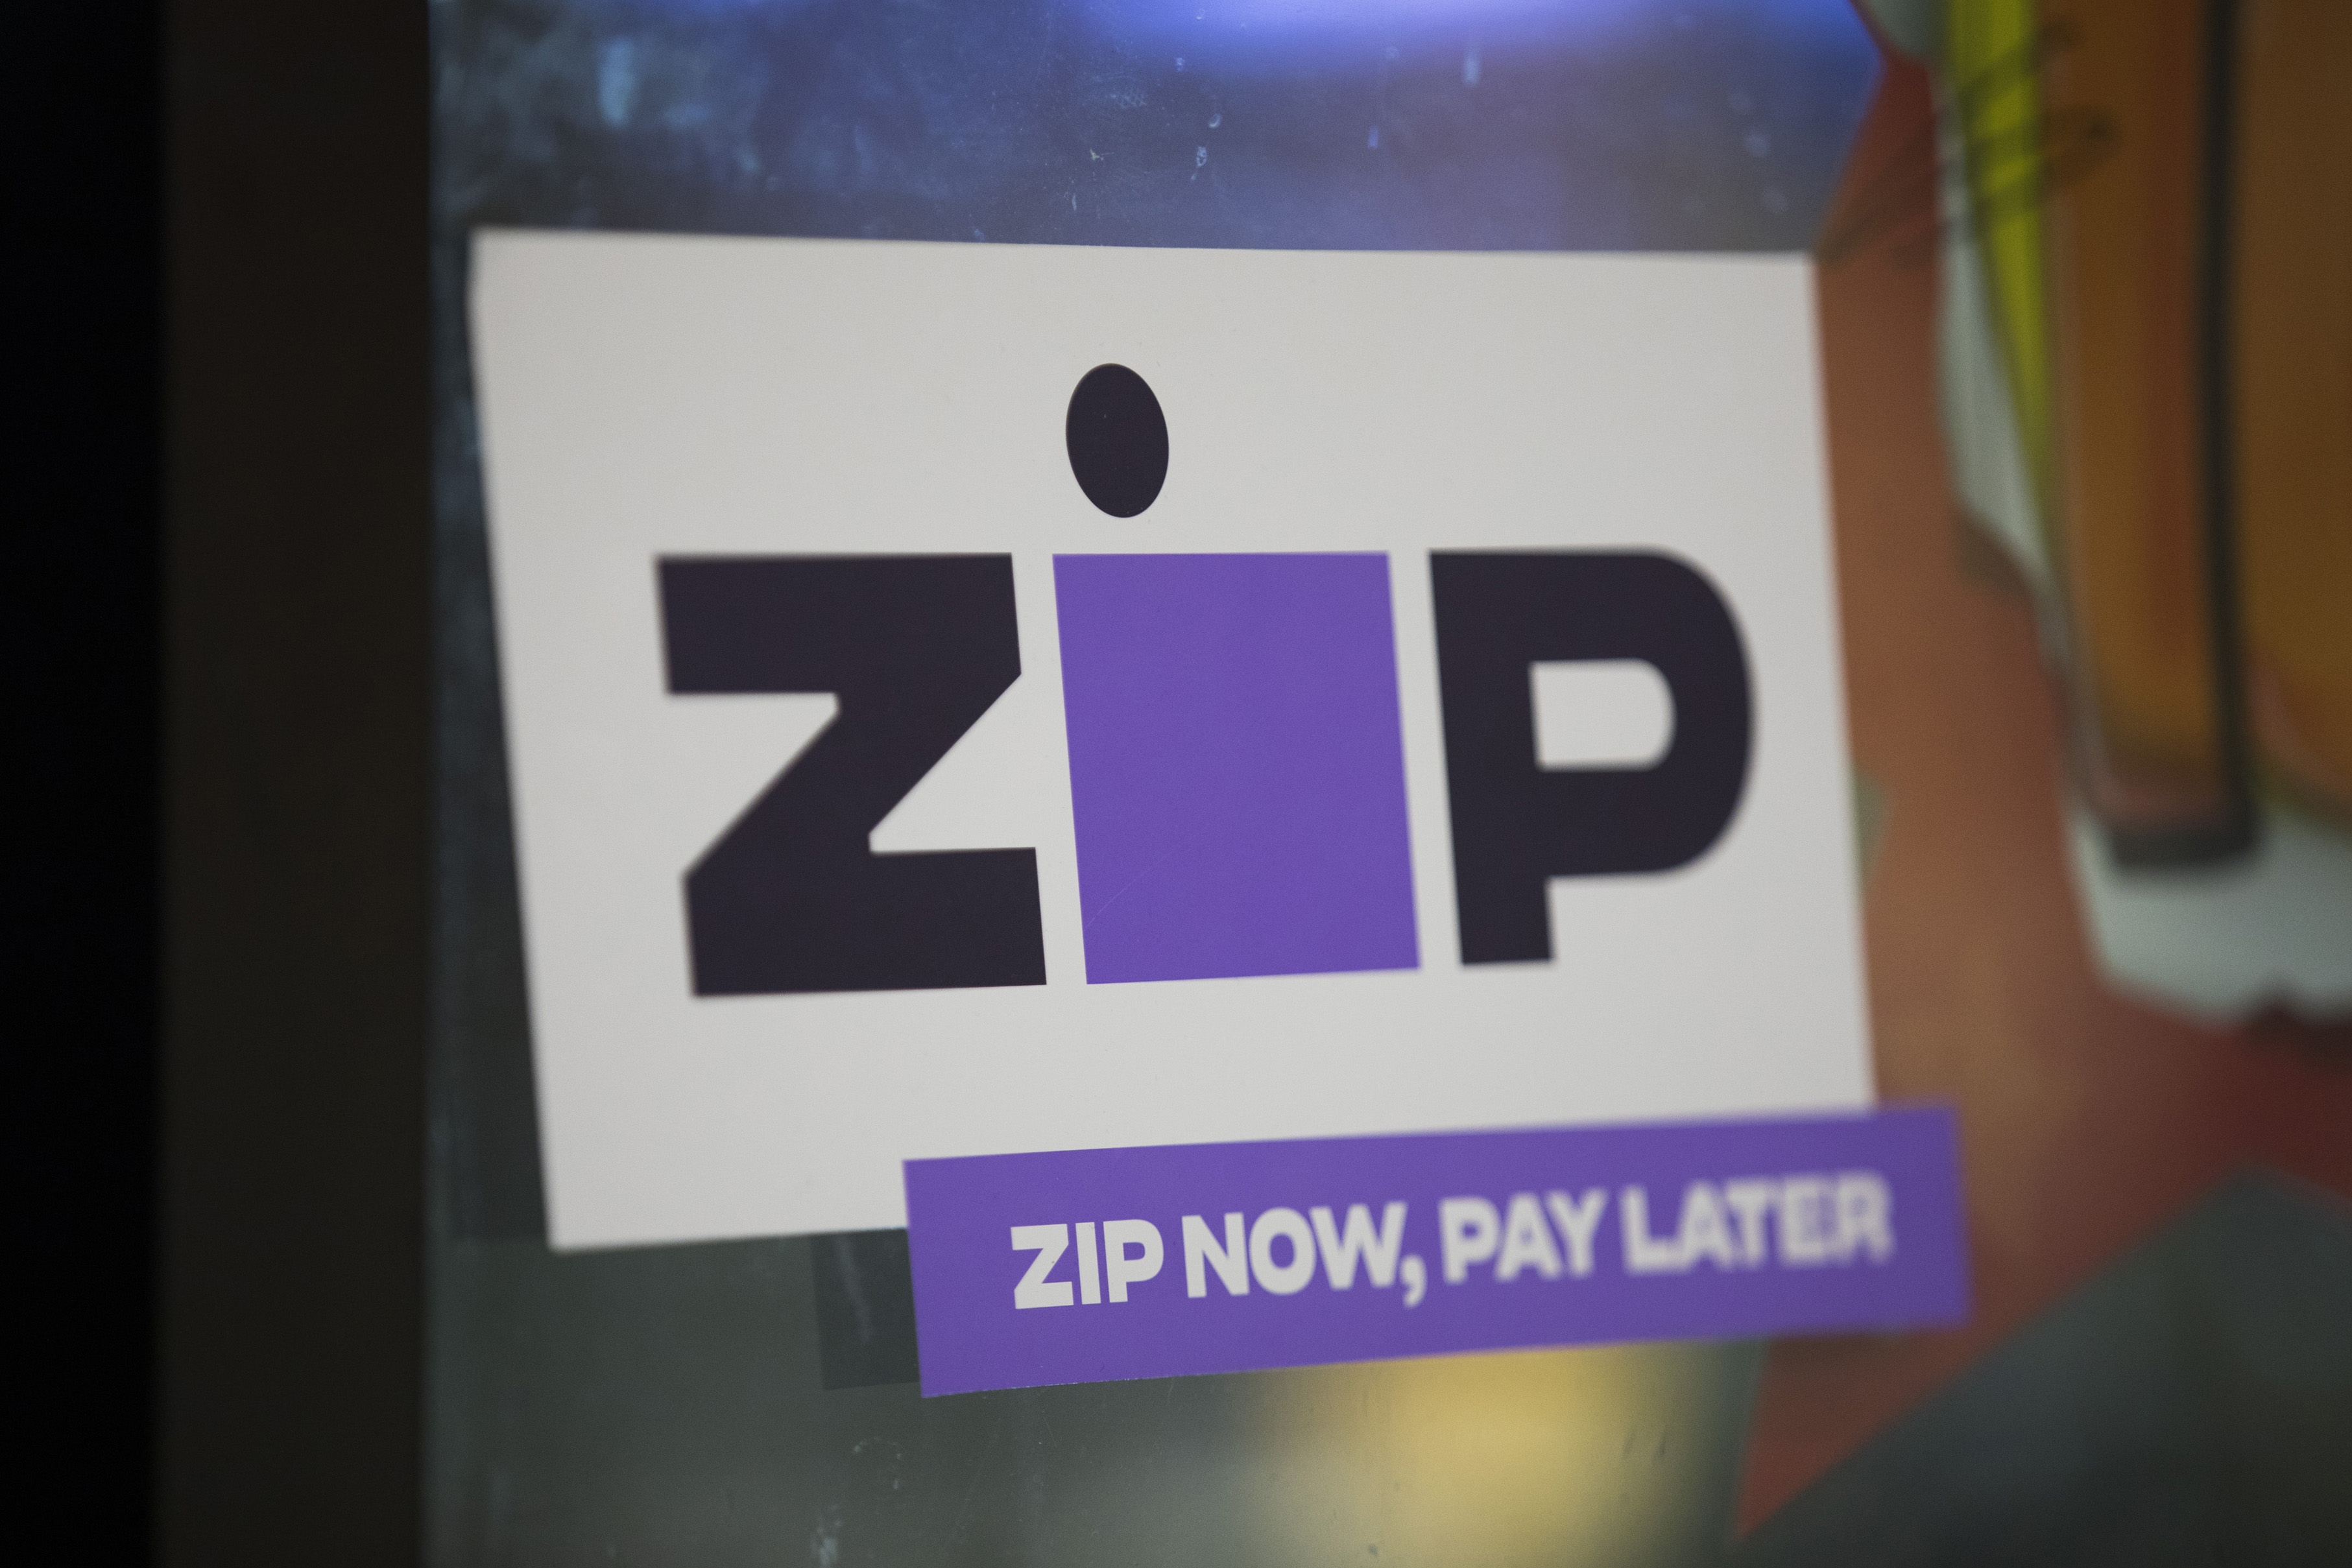 zip pay later